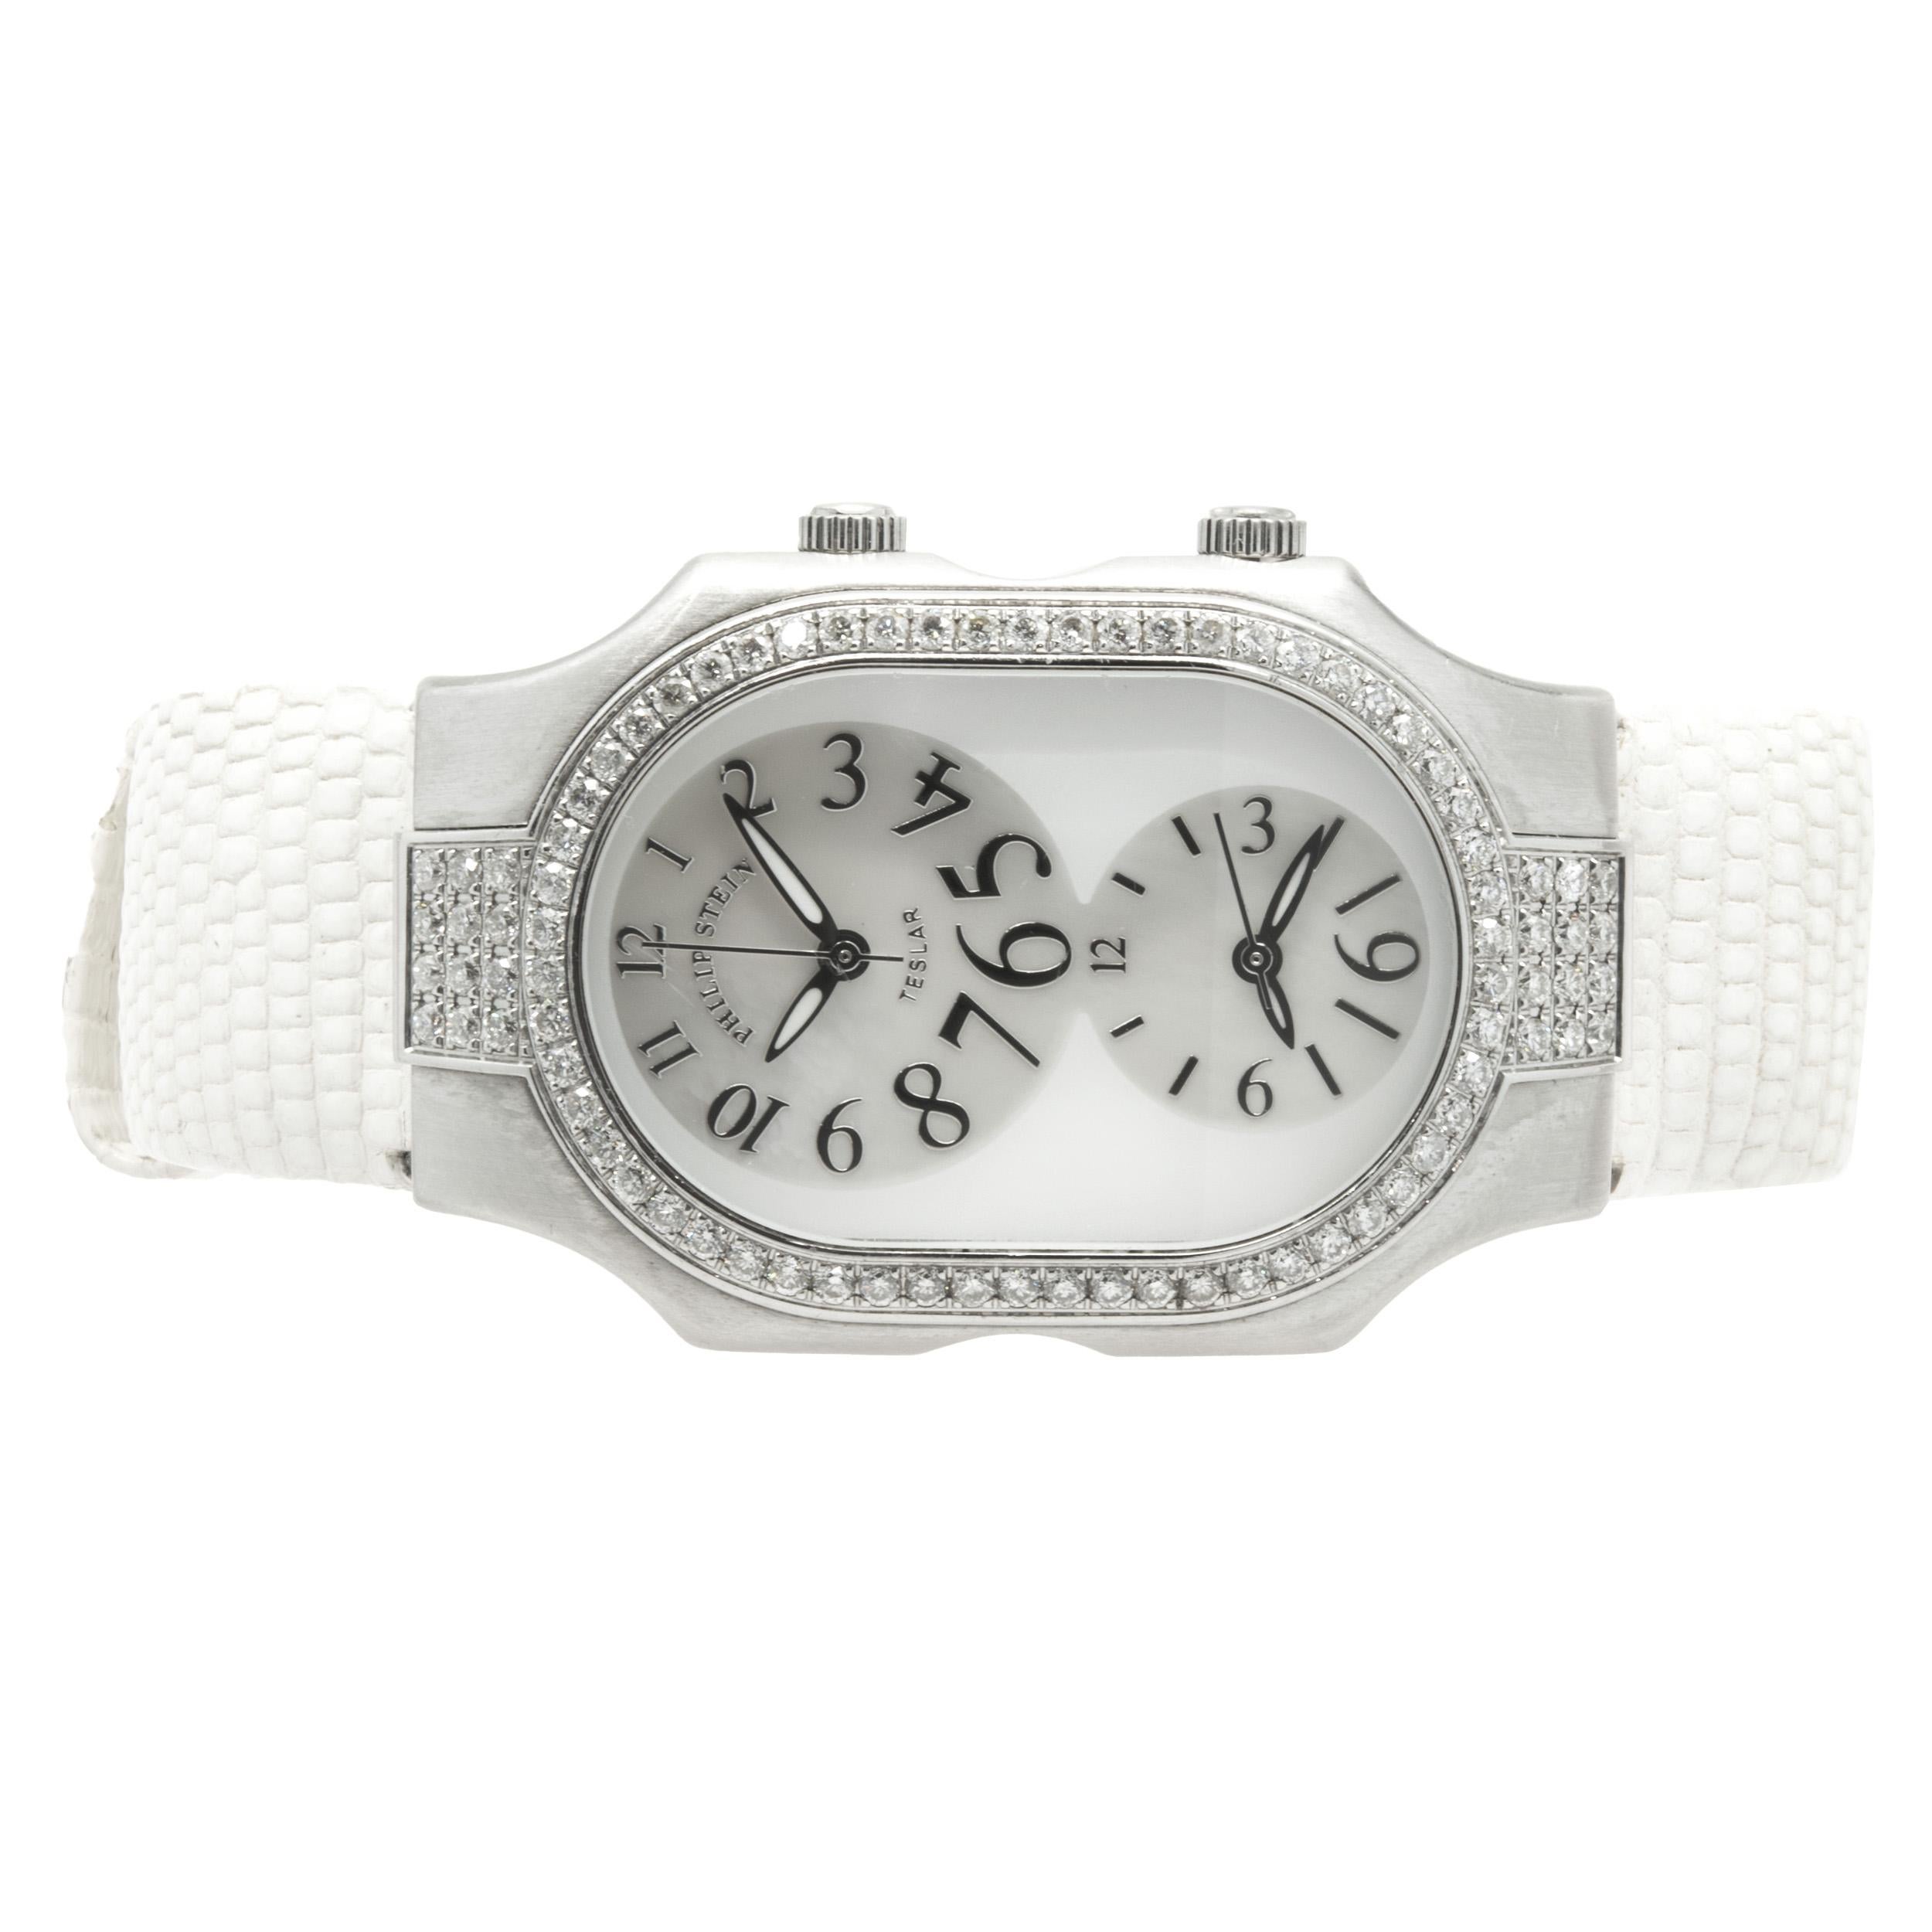 Movement: quartz
Function: hours, minutes, seconds, dual time
Case: 32mm stainless steel case with sapphire crystal, diamond bezel, stainless steel winding crowns, water resistant to 30 meters
Band: white lizard strap, buckle
Dial: mother of